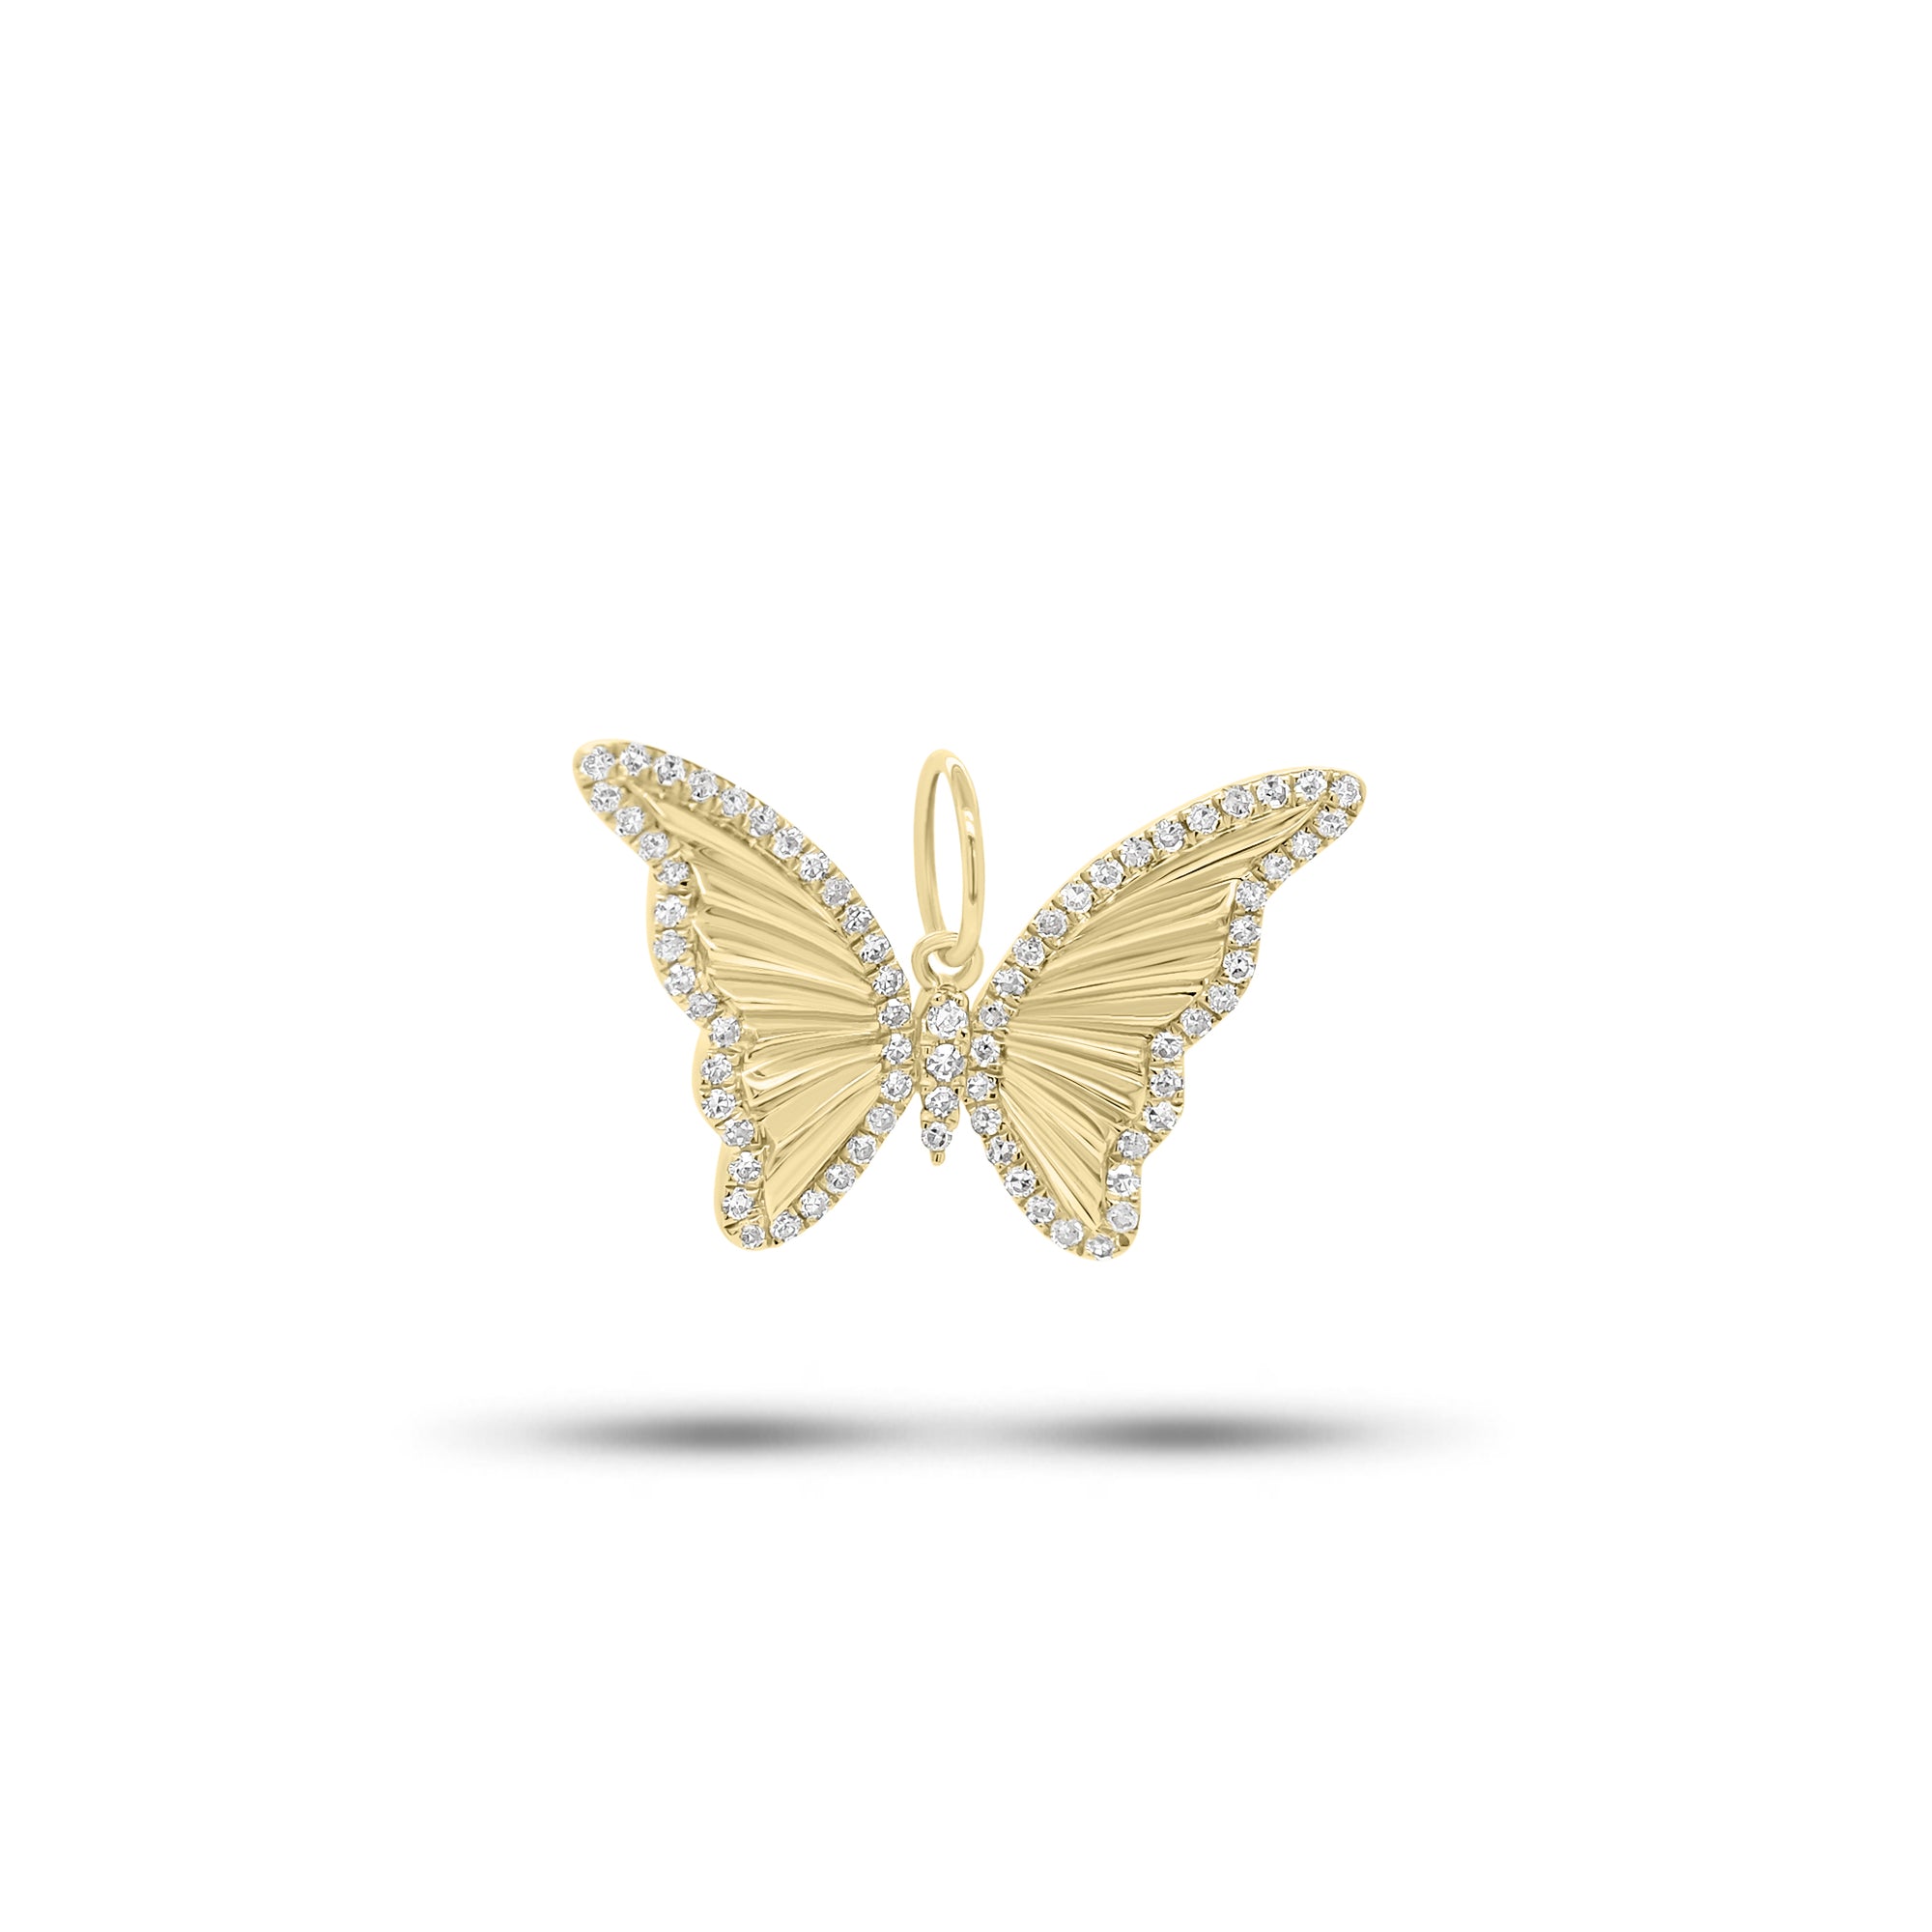 Diamond & Pleated Gold Butterfly Pendant - 14K gold weighing 1.15 grams  - 74 round diamonds weighing 0.15 carats